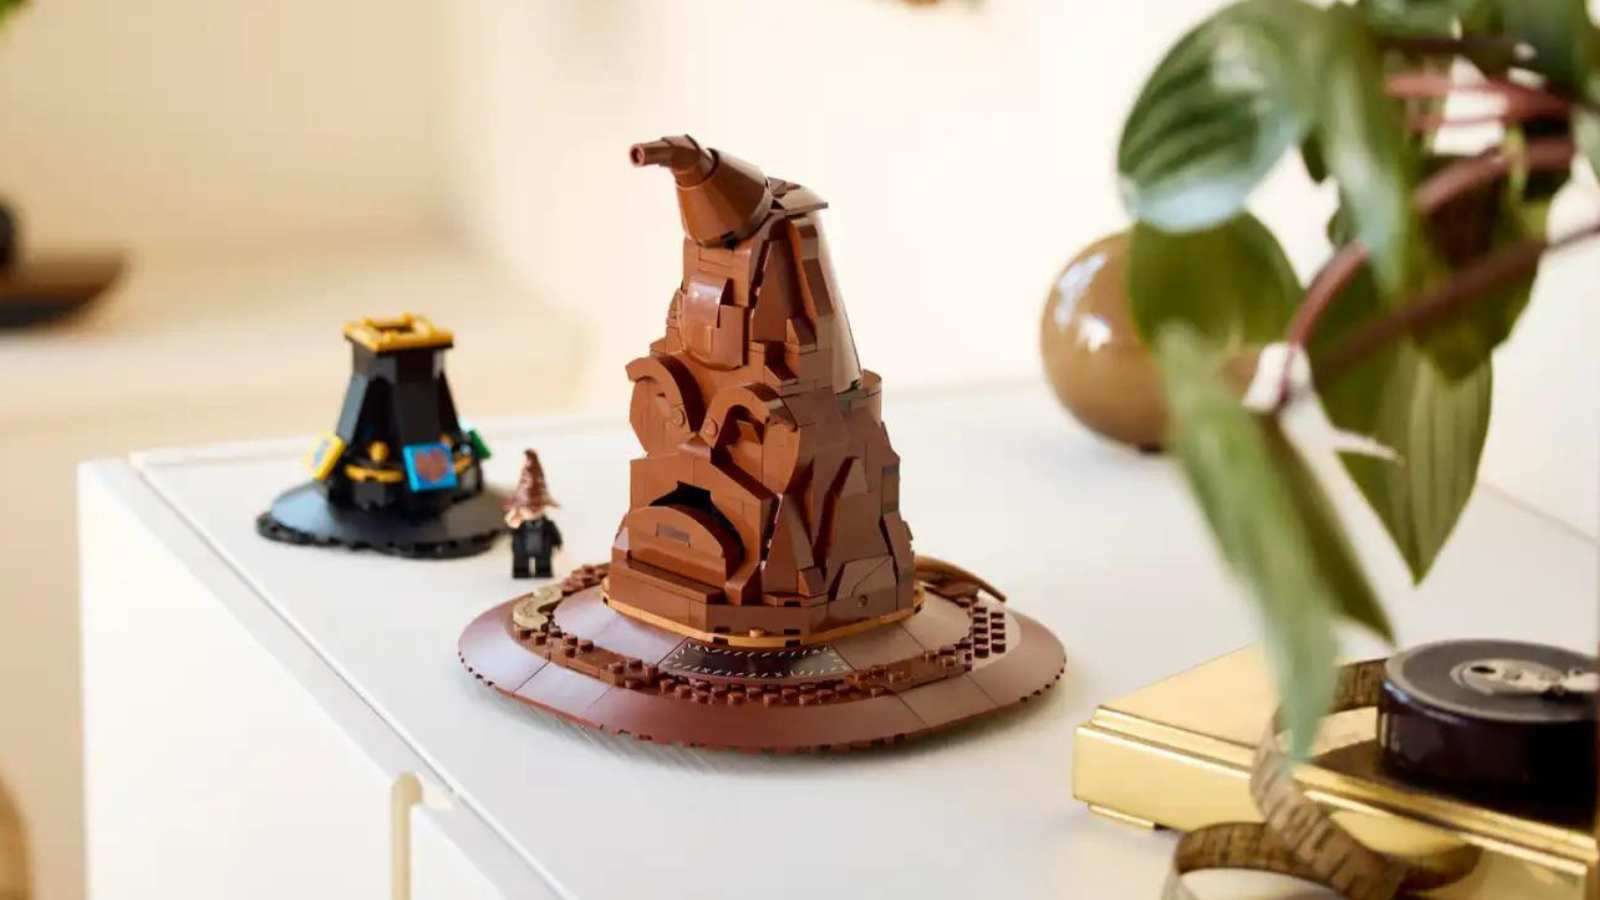 The LEGO-reimagined Sorting Hat on display